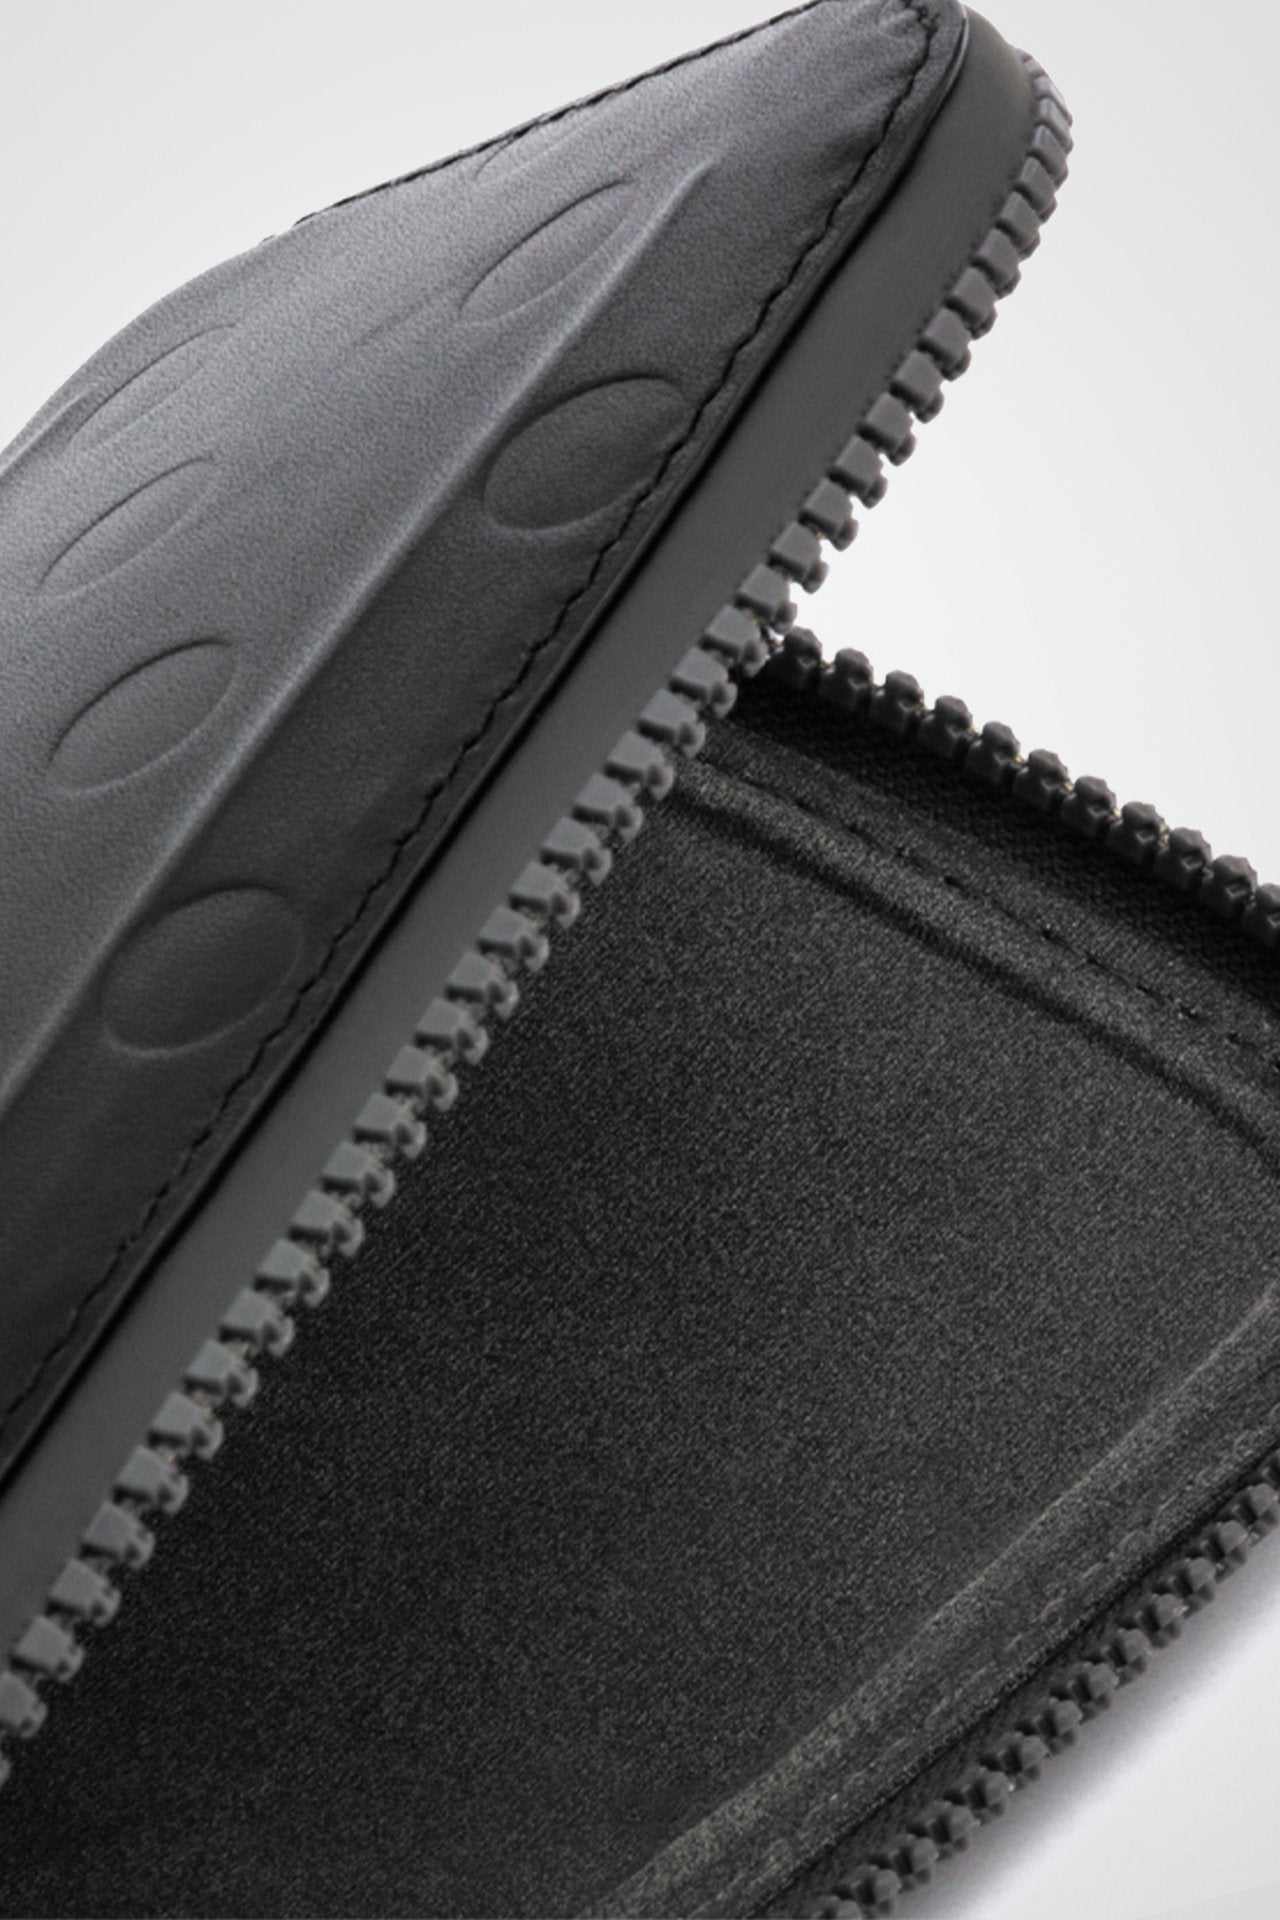 MAAP x Bellroy All-Conditions Phone Pocket Plus